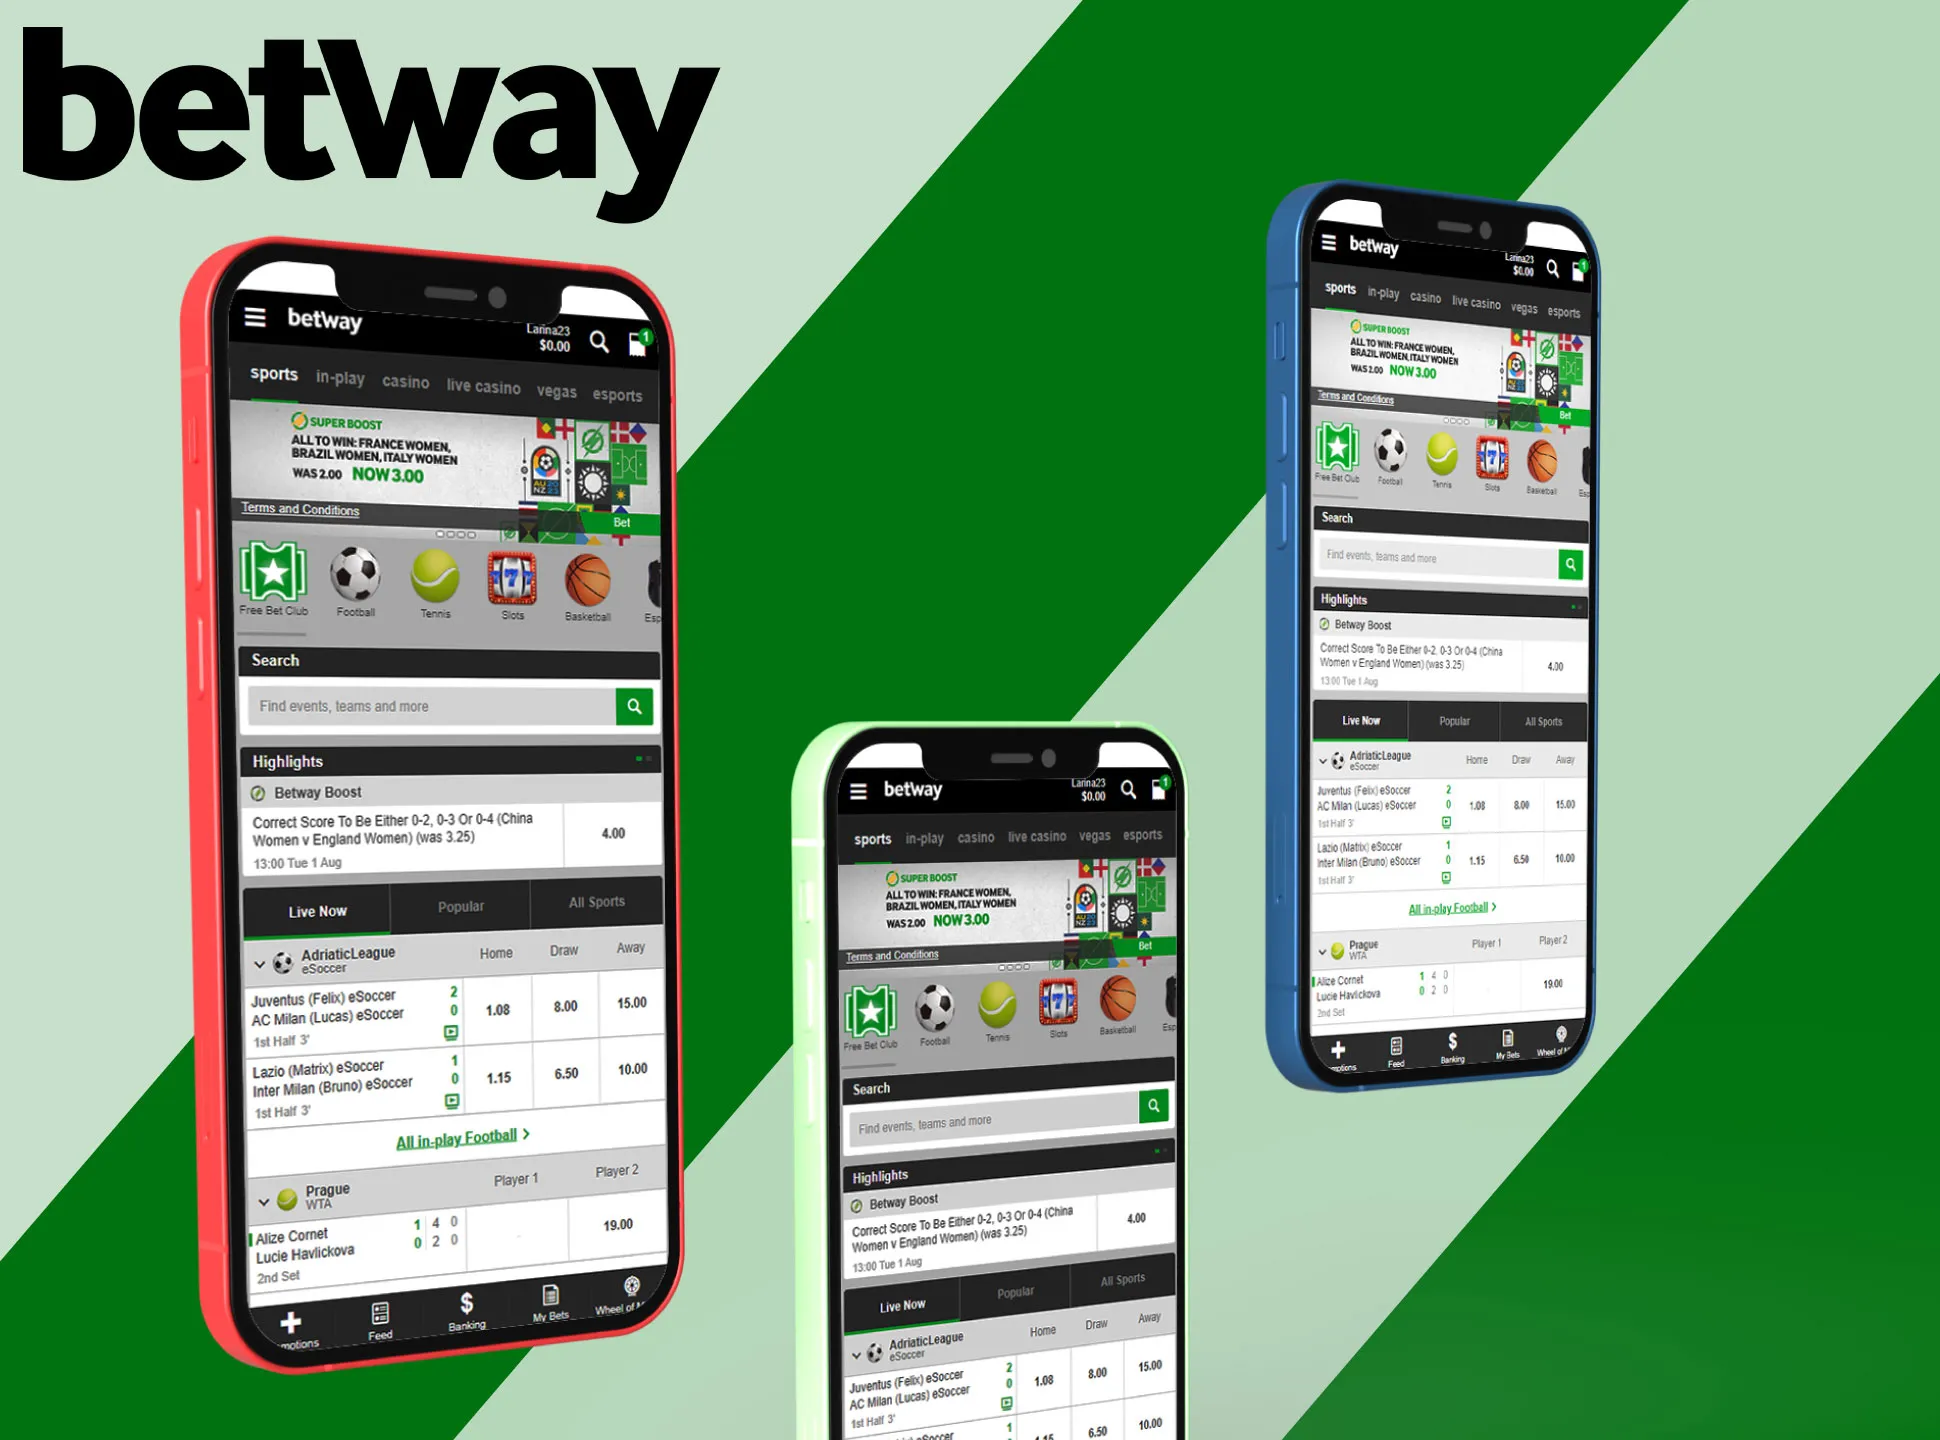 You will find various sports events, live streamings, casino games in the Betway app.